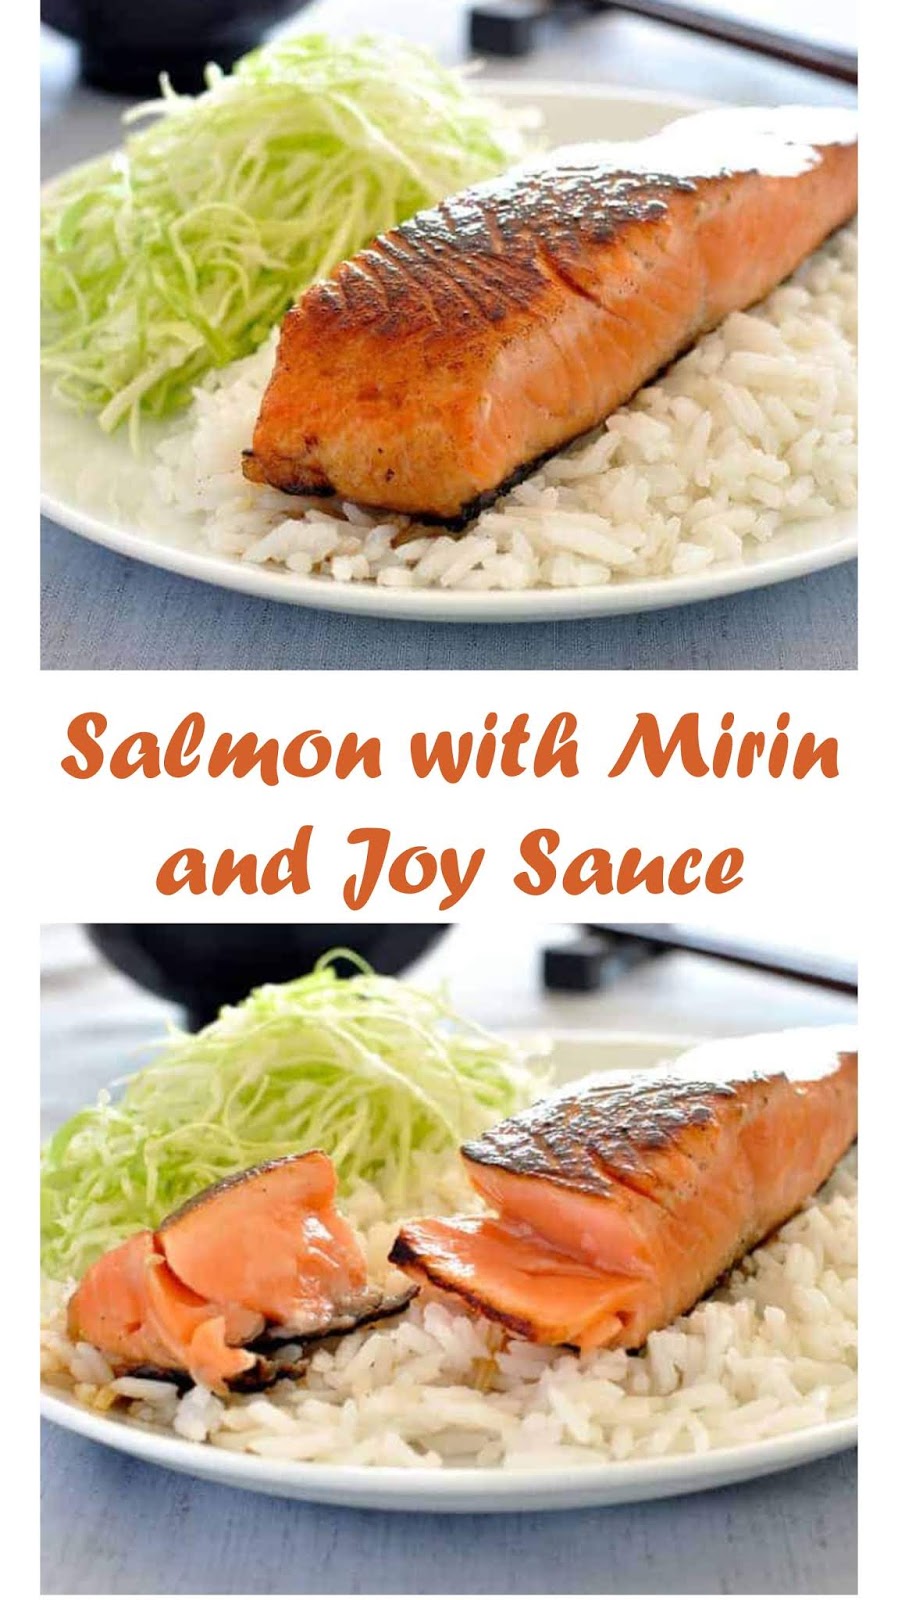 838 Reviews: My BEST #Recipes >> #Salmon with Mirin and Joy Sauce - ......